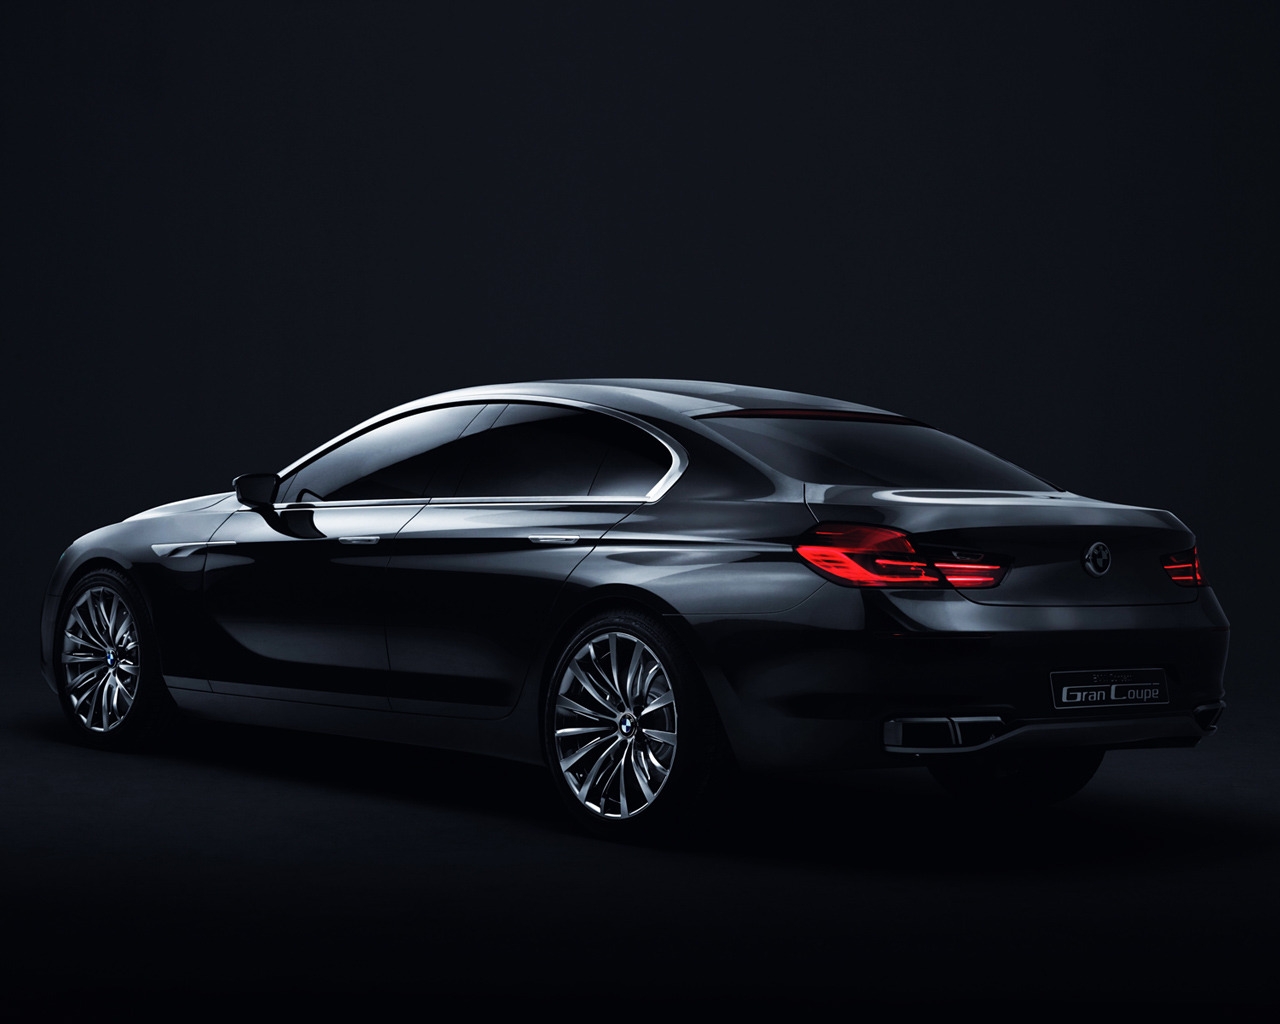 BMW Gran Coupe Rear for 1280 x 1024 resolution